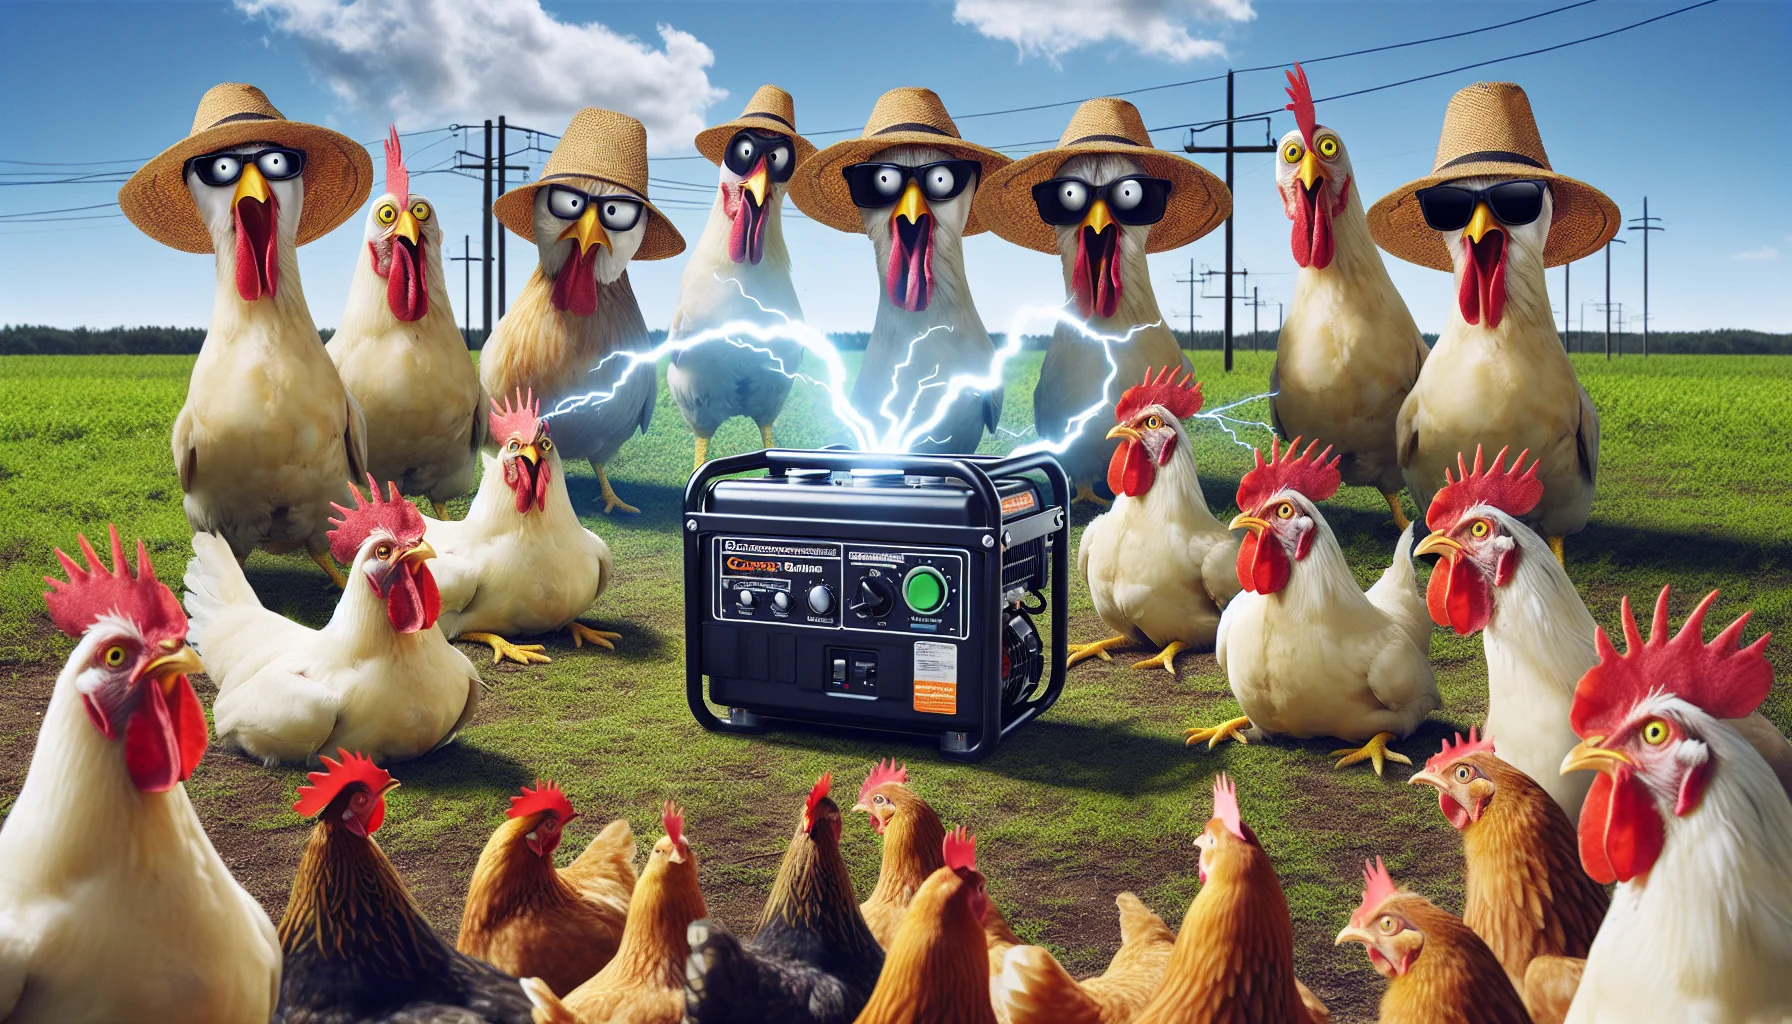 Create an imaginative scene that tickles the viewer's funny bone. In this scene, it's a cool, sunny afternoon and a perplexed group of chickens, with their feathers standing on end, all looking towards a cluster of portable generators humorously personified. Each generator shows distinctive human-like characteristics and wears an amusing expression on its 'face'. A pair of straw hats are tipped on their 'heads', and they're sporting thick, comic glasses. Electricity arcs playfully between them, indicating their commanding power. Behind, a banner reads, 'Become the Maestro of Power Generation!'. Set in a farm with lush green fields and a beautiful clear sky as a backdrop.